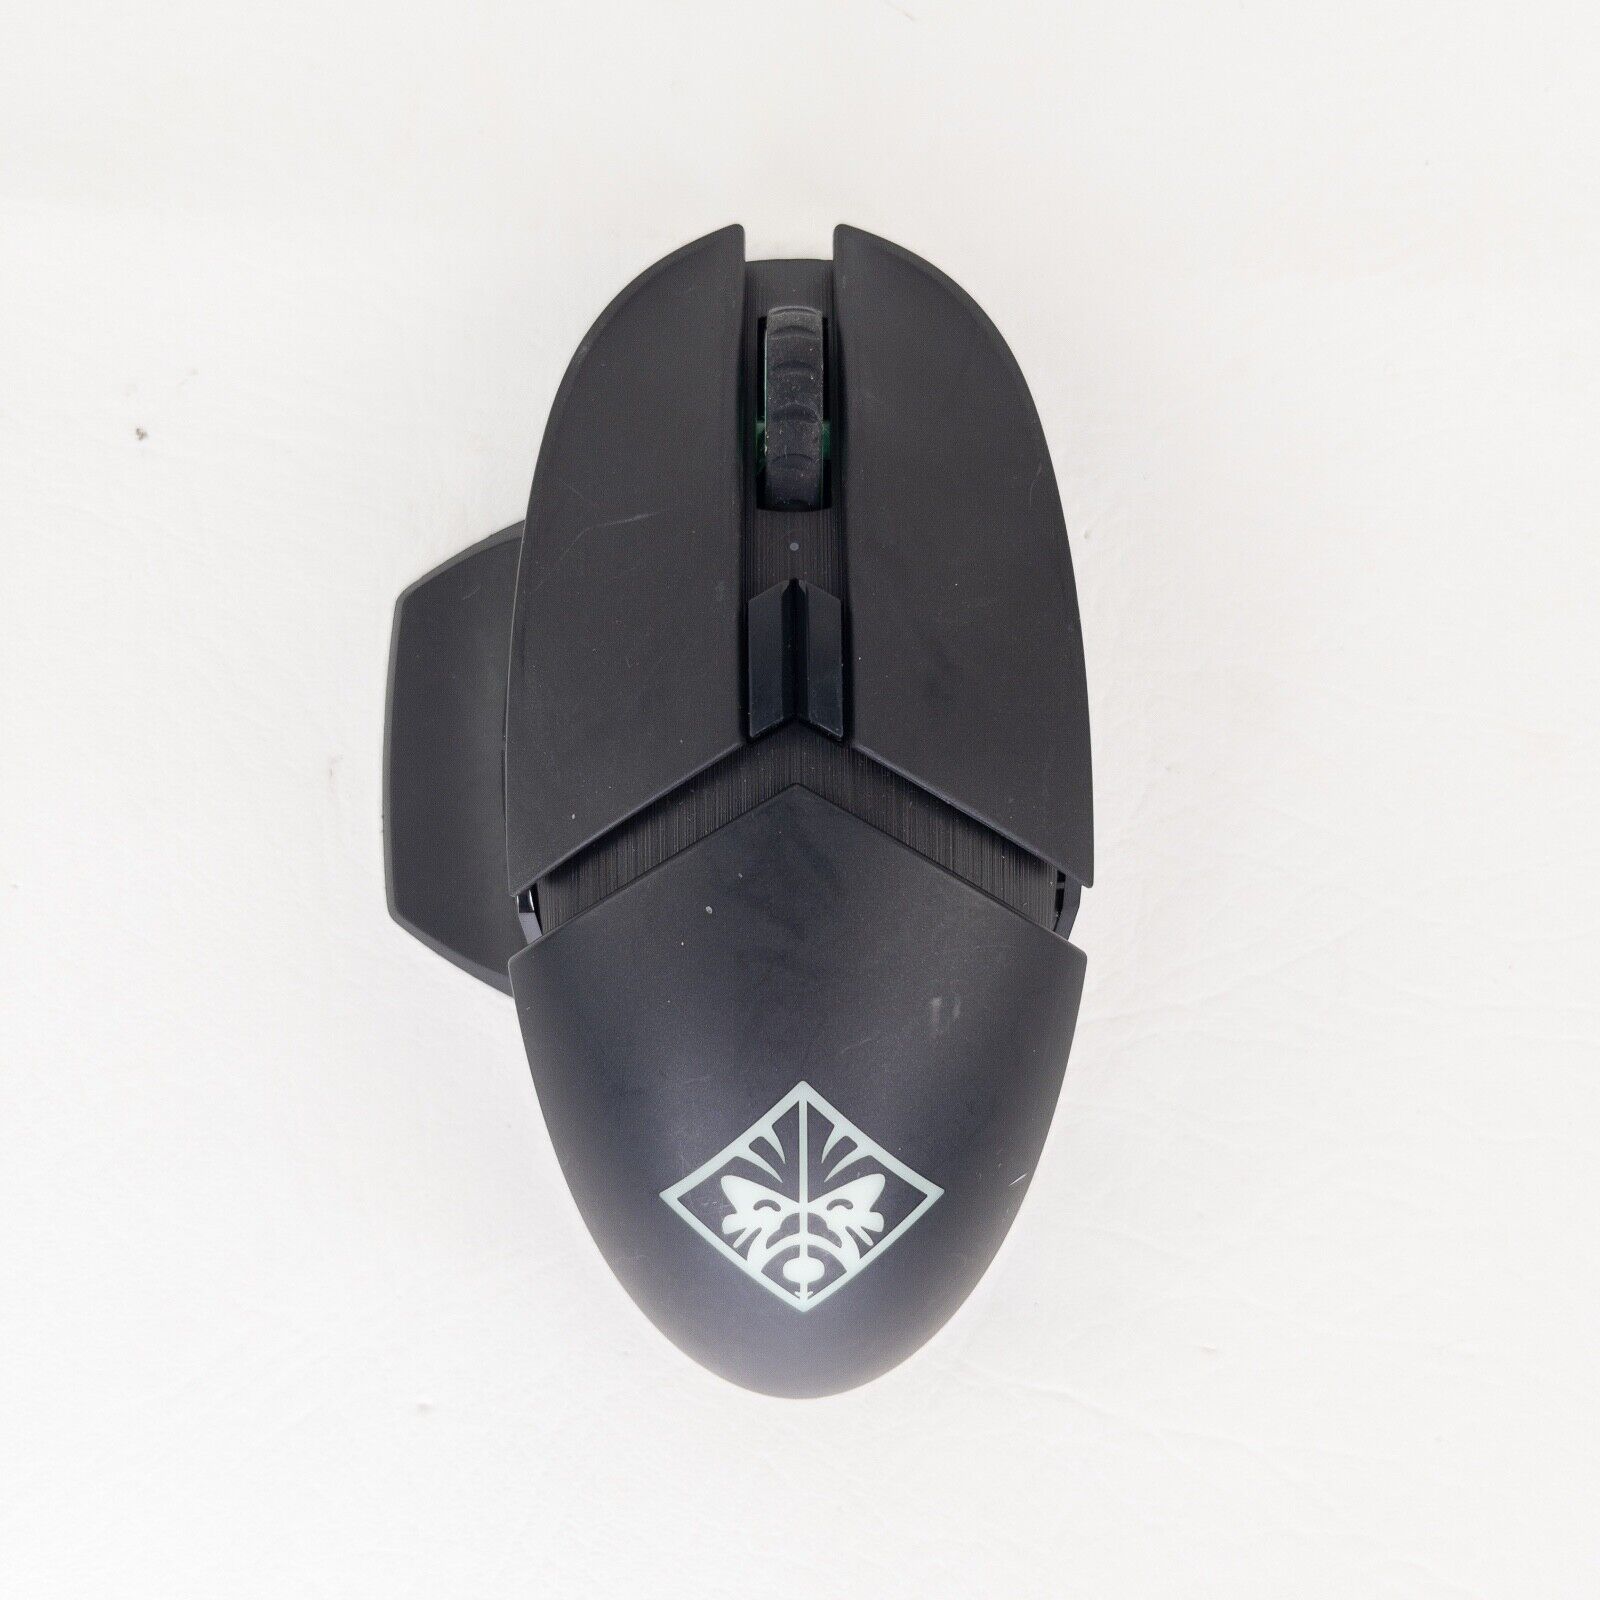 OMEN by HP Photon Wireless Mouse Black USB (6CL96AA#ABL) NO DONGLE